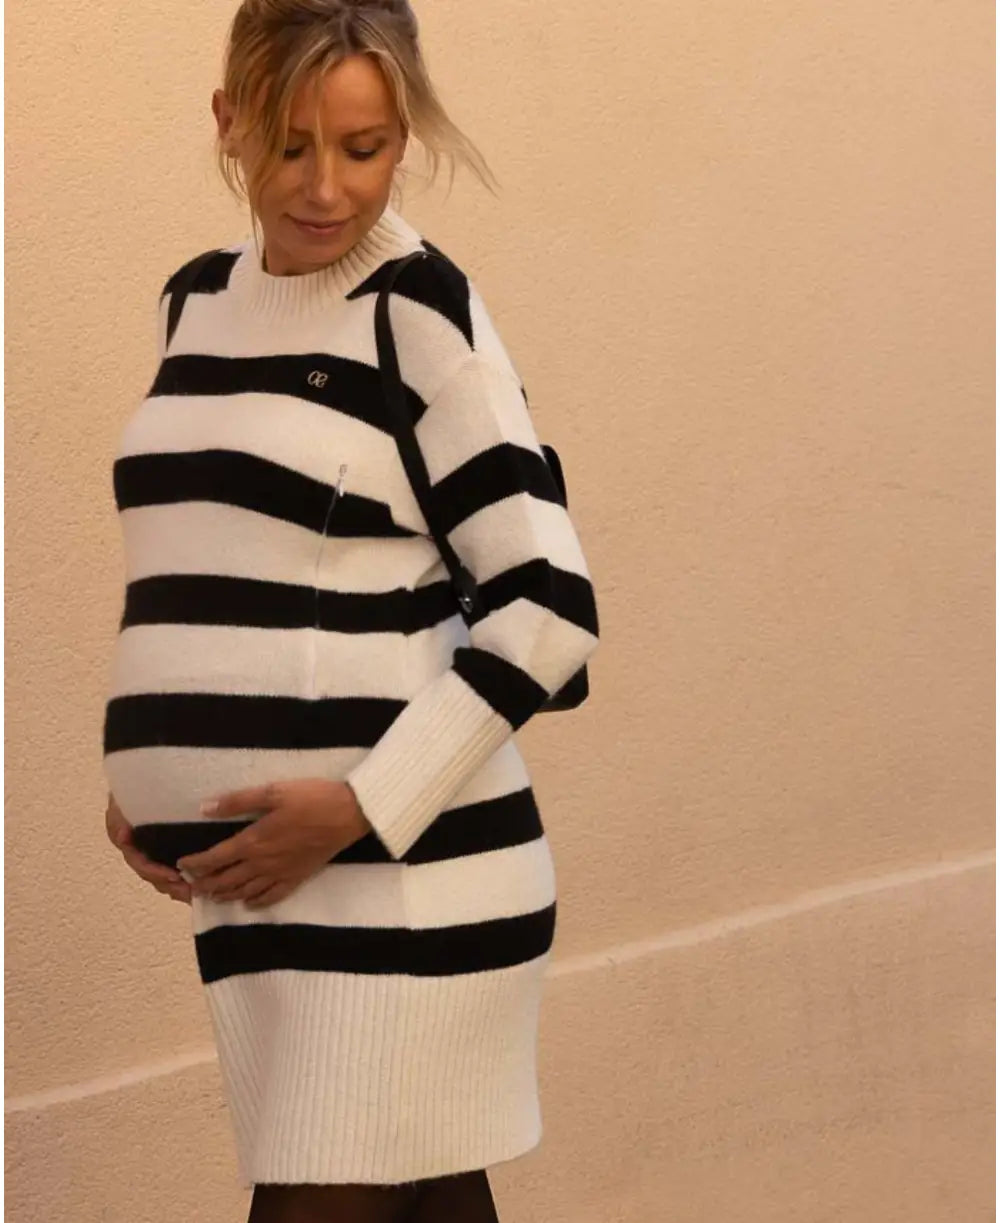 Deauville maternity and nursing sweater dress